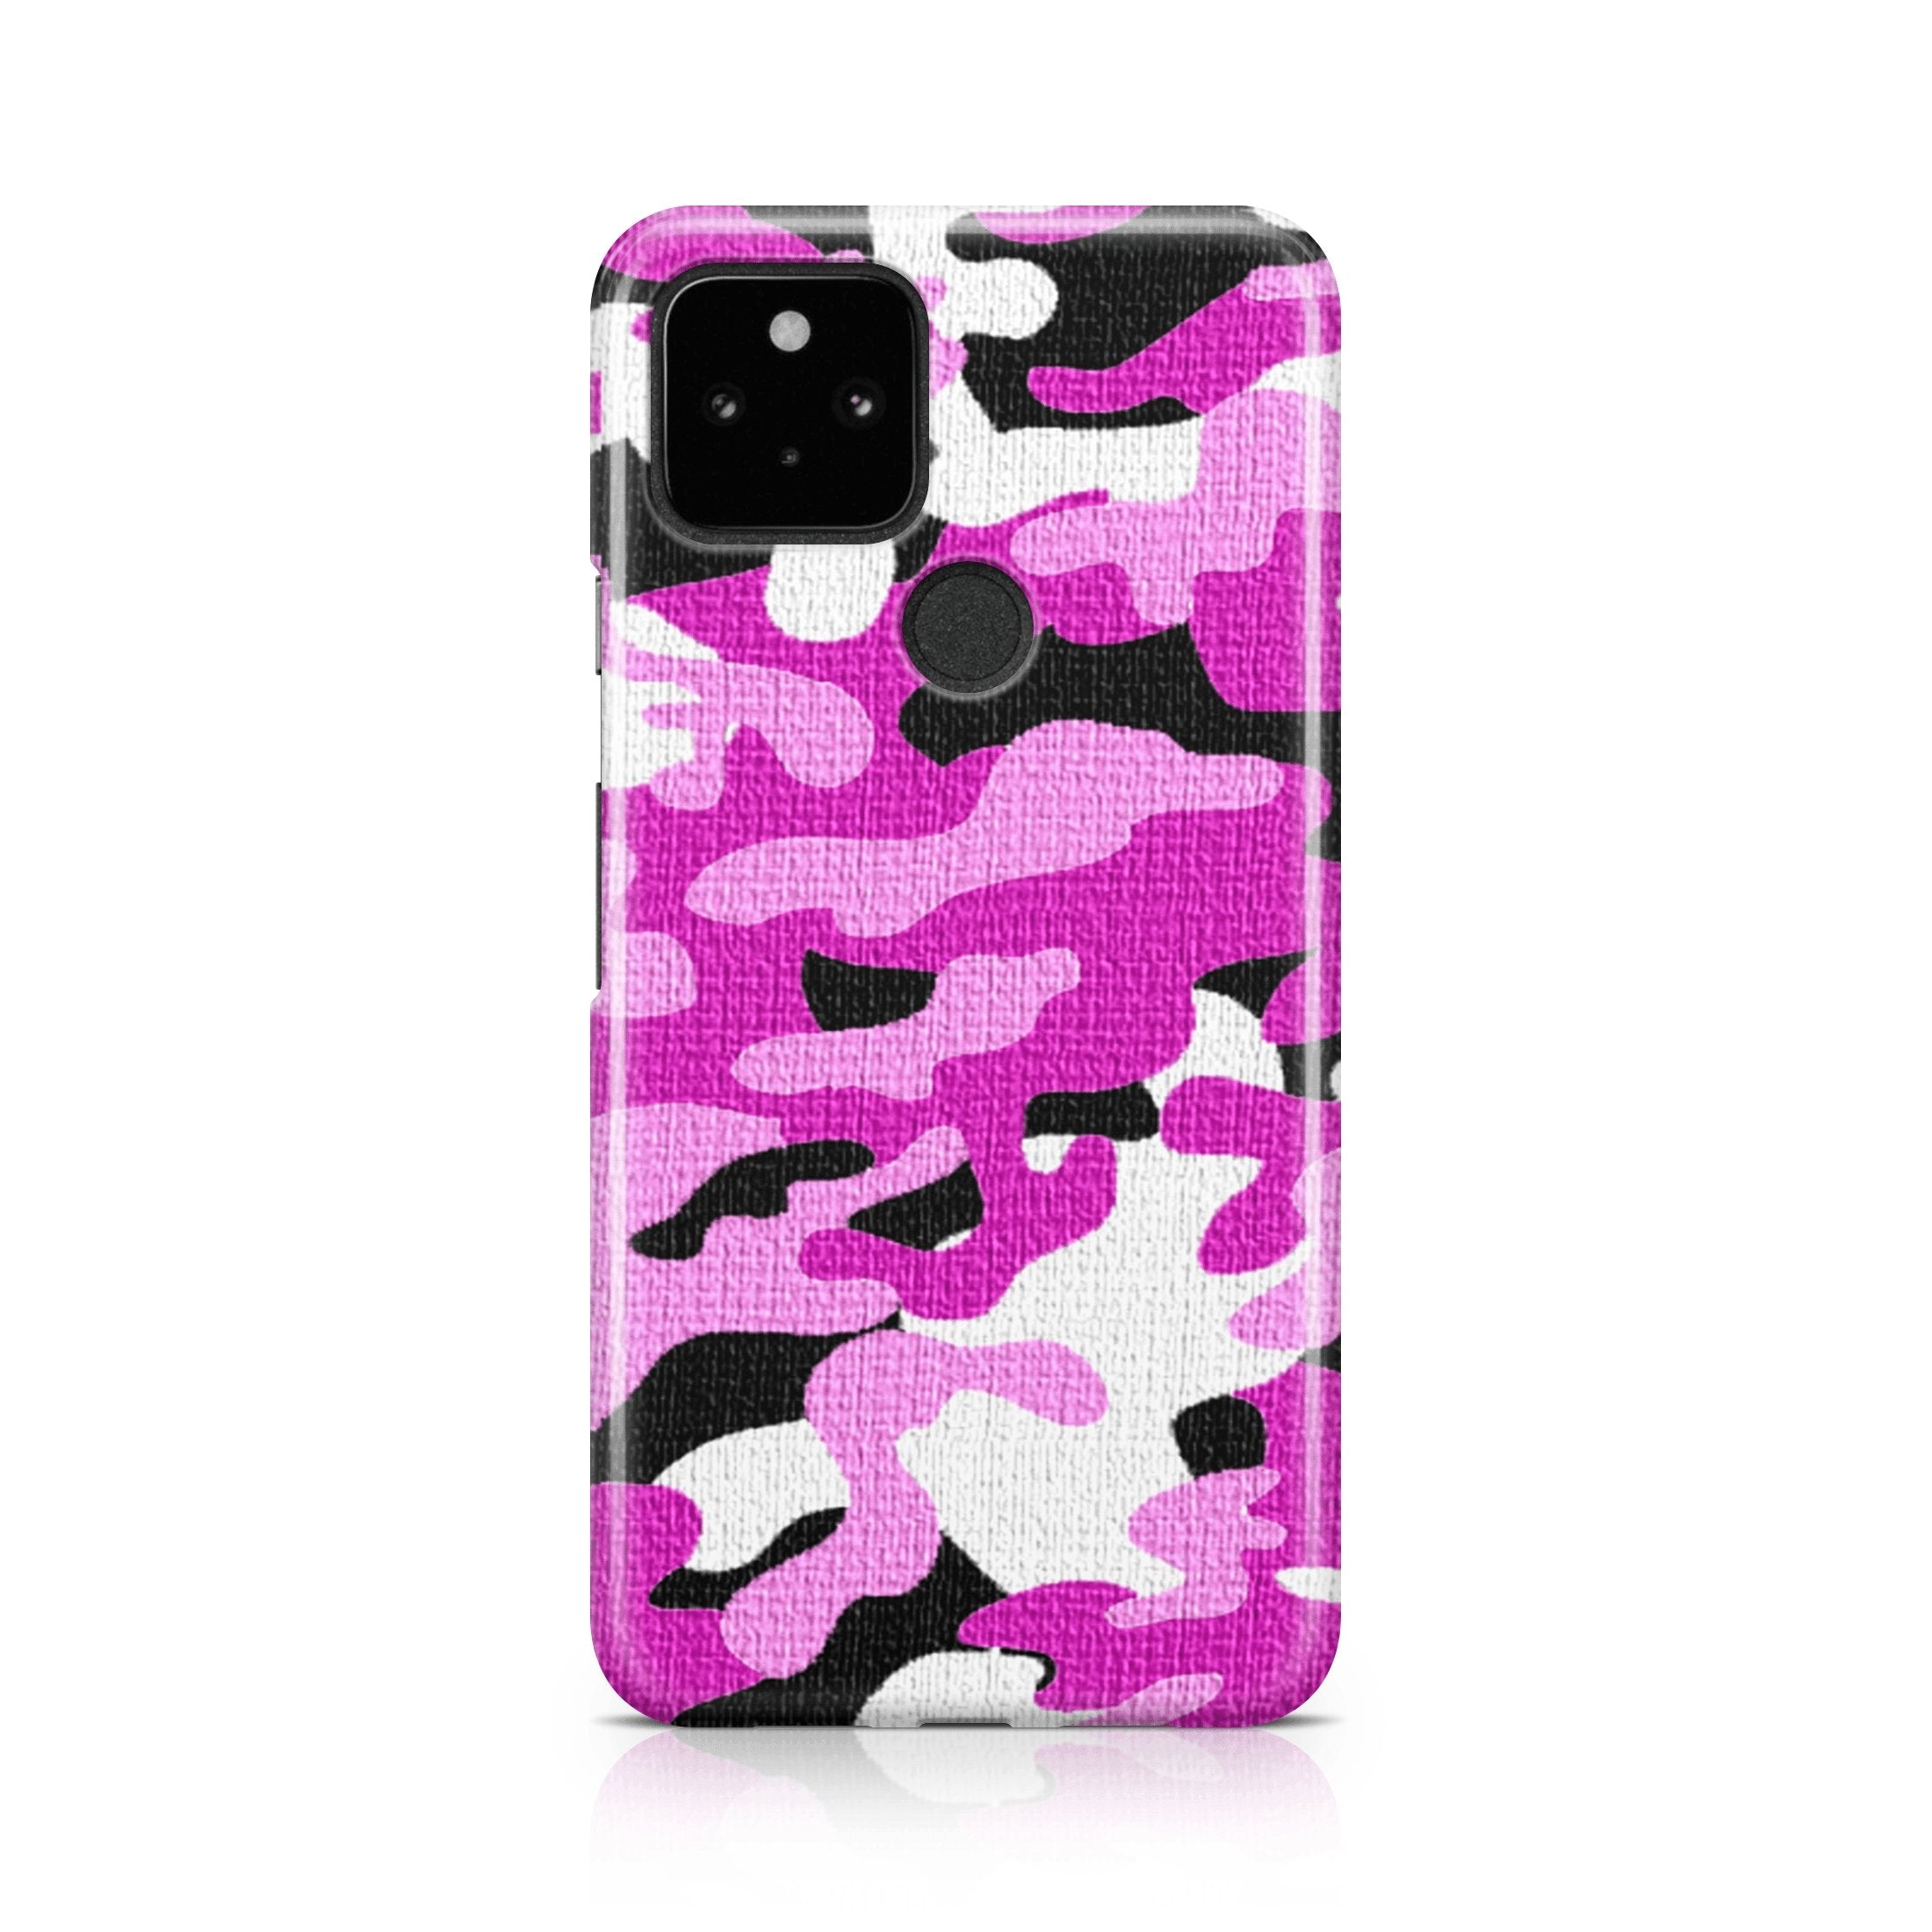 Pink Camo - Google phone case designs by CaseSwagger